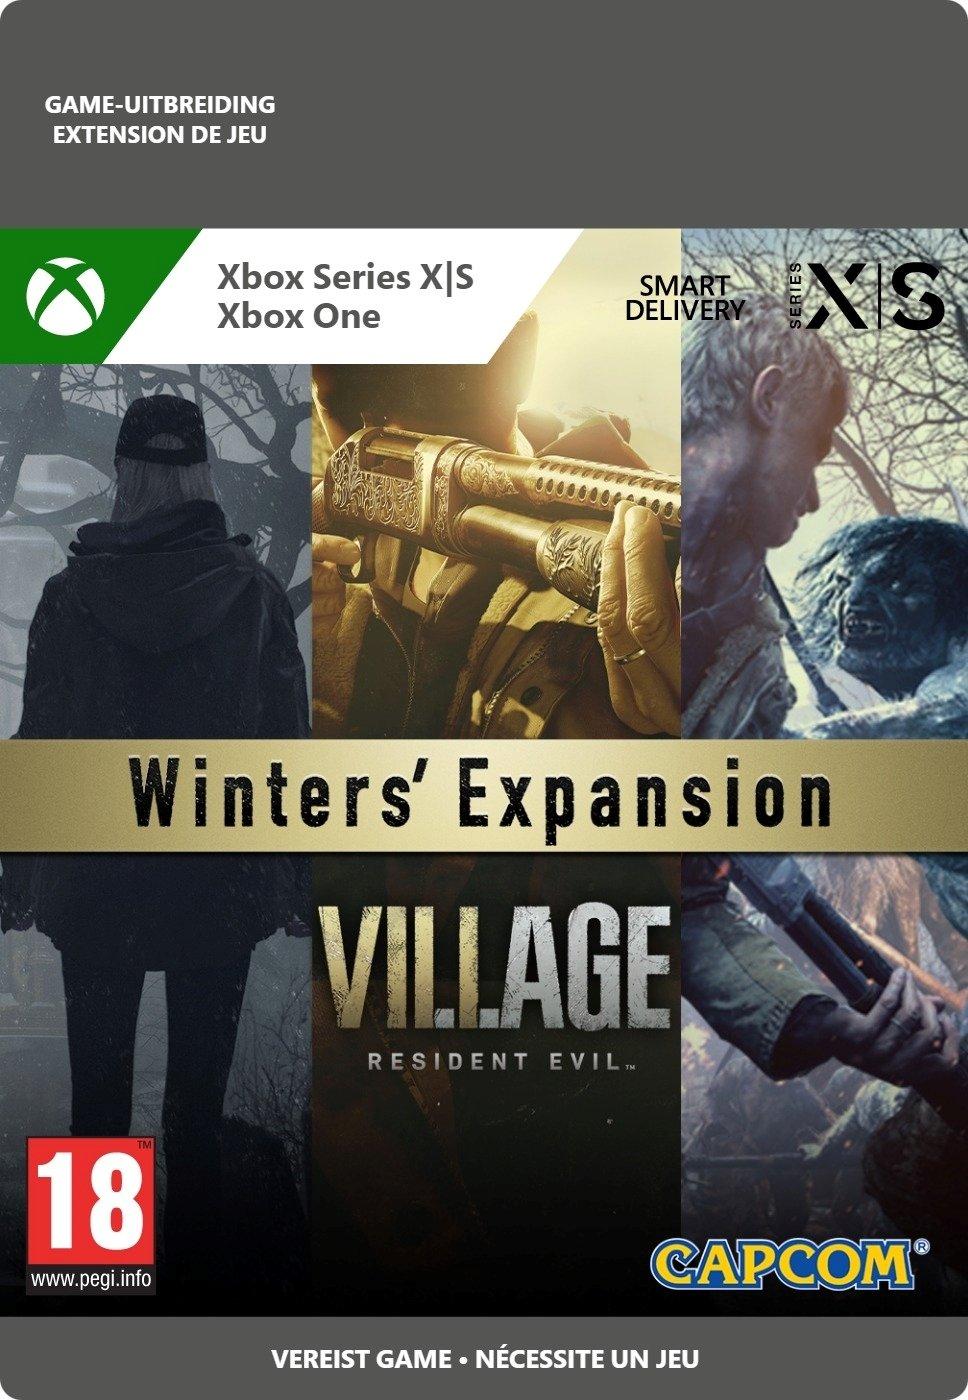 Resident Evil Village: Winters' Expansion - Xbox Series X/Xbox One - Add-on | 7D4-00647 (6f29286e-e6d9-4940-a9e1-62d6fd91f9f6)